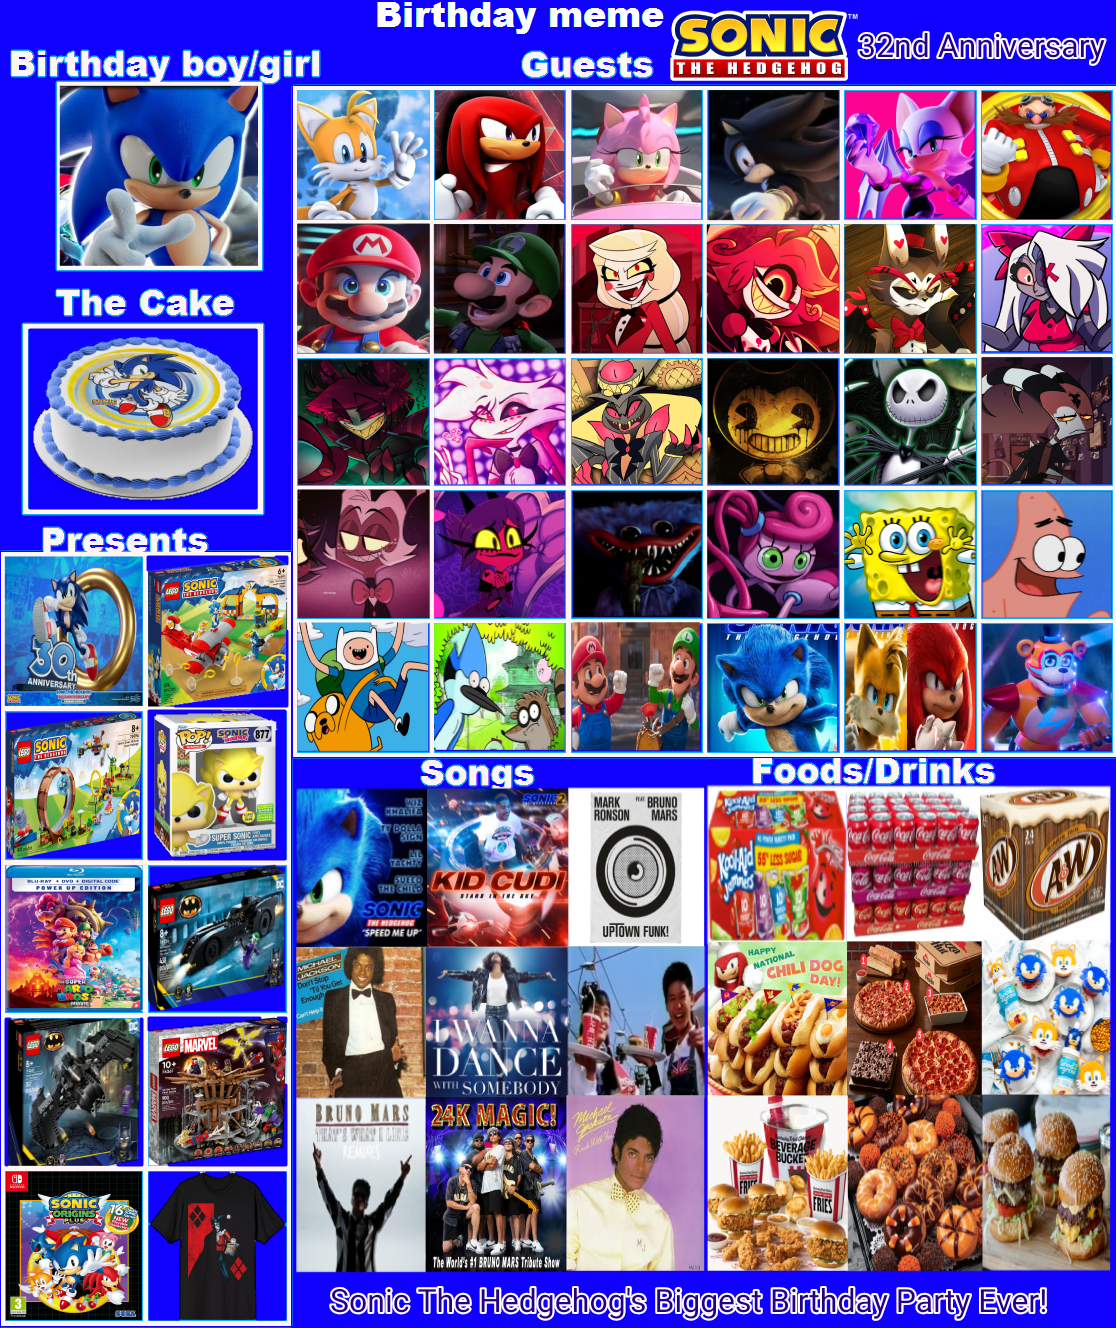 Five Nights At Freddy's Movie Cinema Party by JosephPlus2001 on DeviantArt